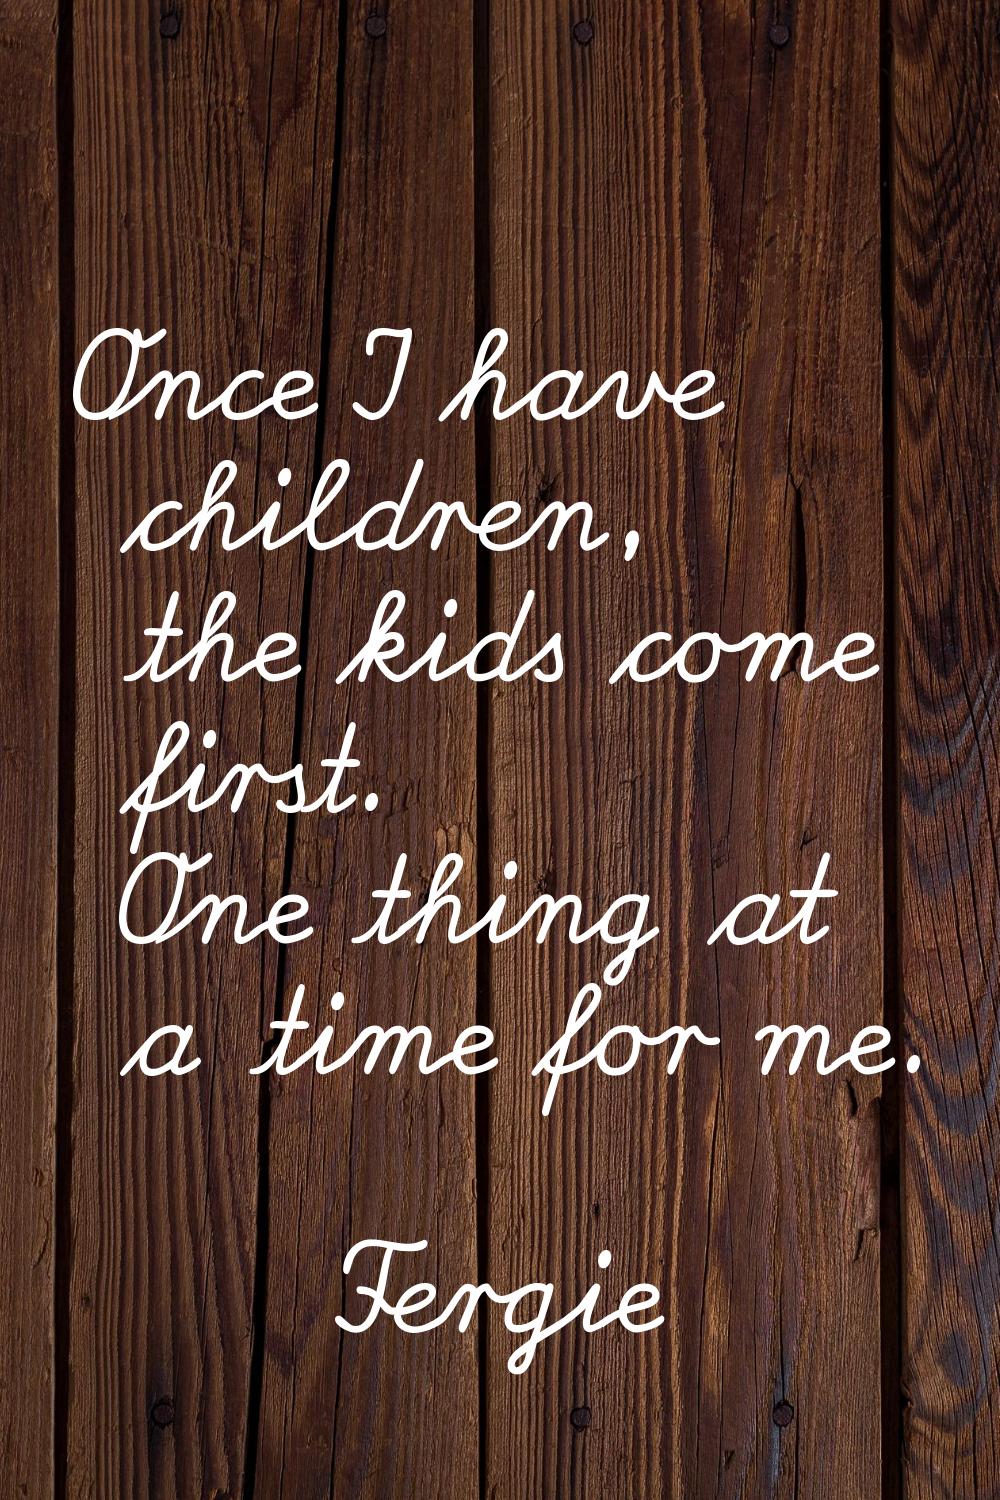 Once I have children, the kids come first. One thing at a time for me.